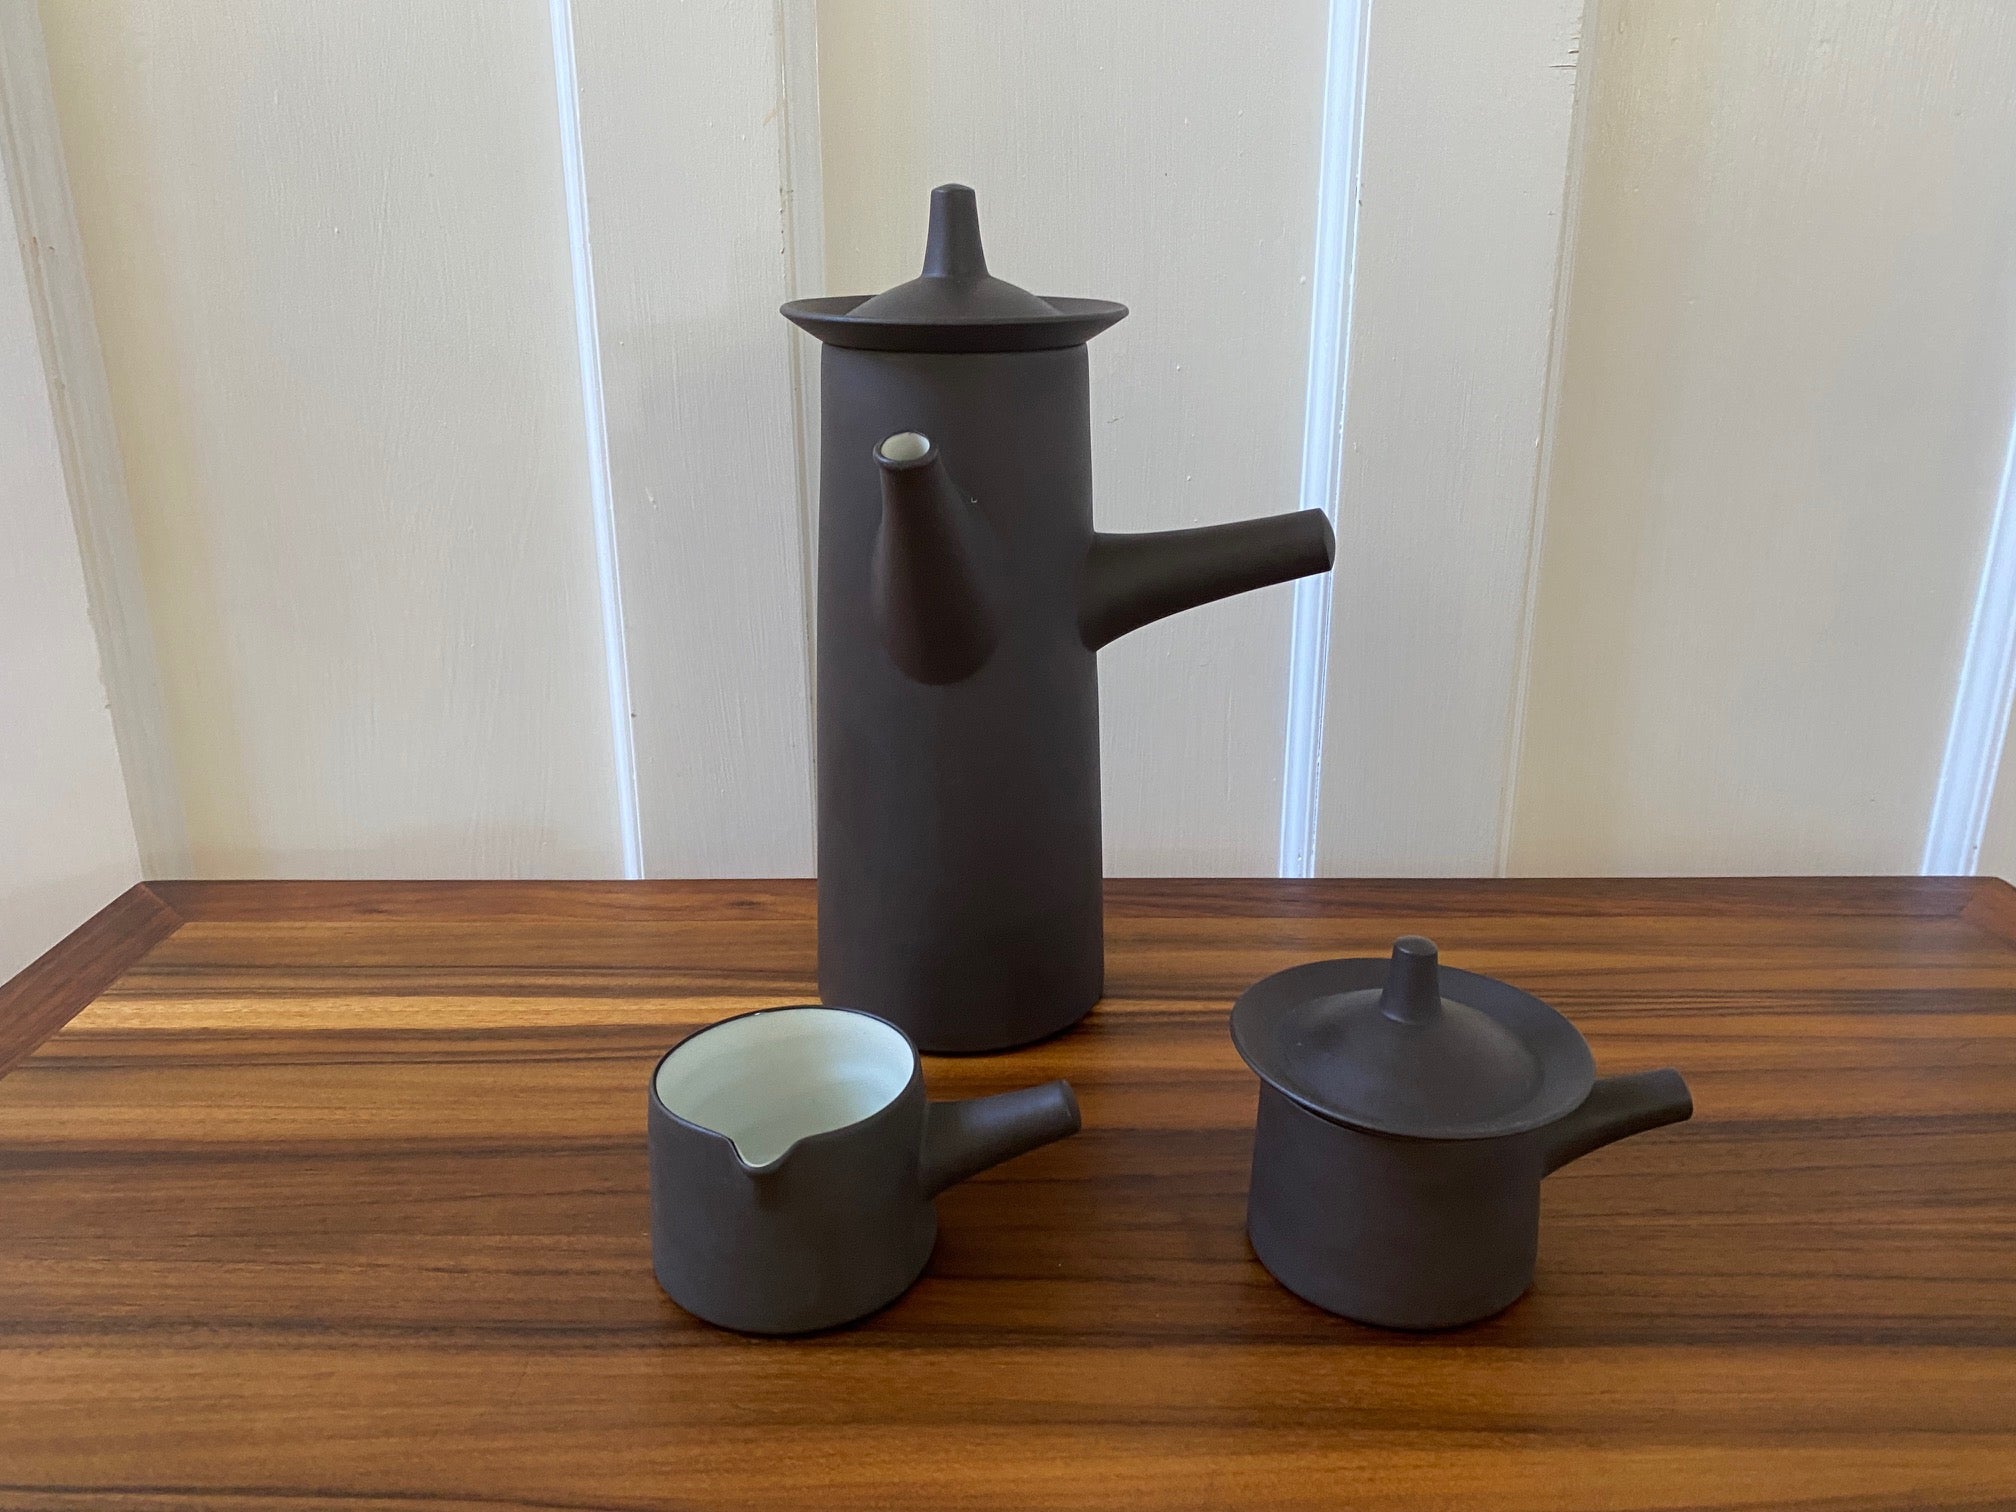 A beautiful coffee pot, creamer and sugar designed by Jens Harald Quistgaard for Dansk- Cook Street Vintage